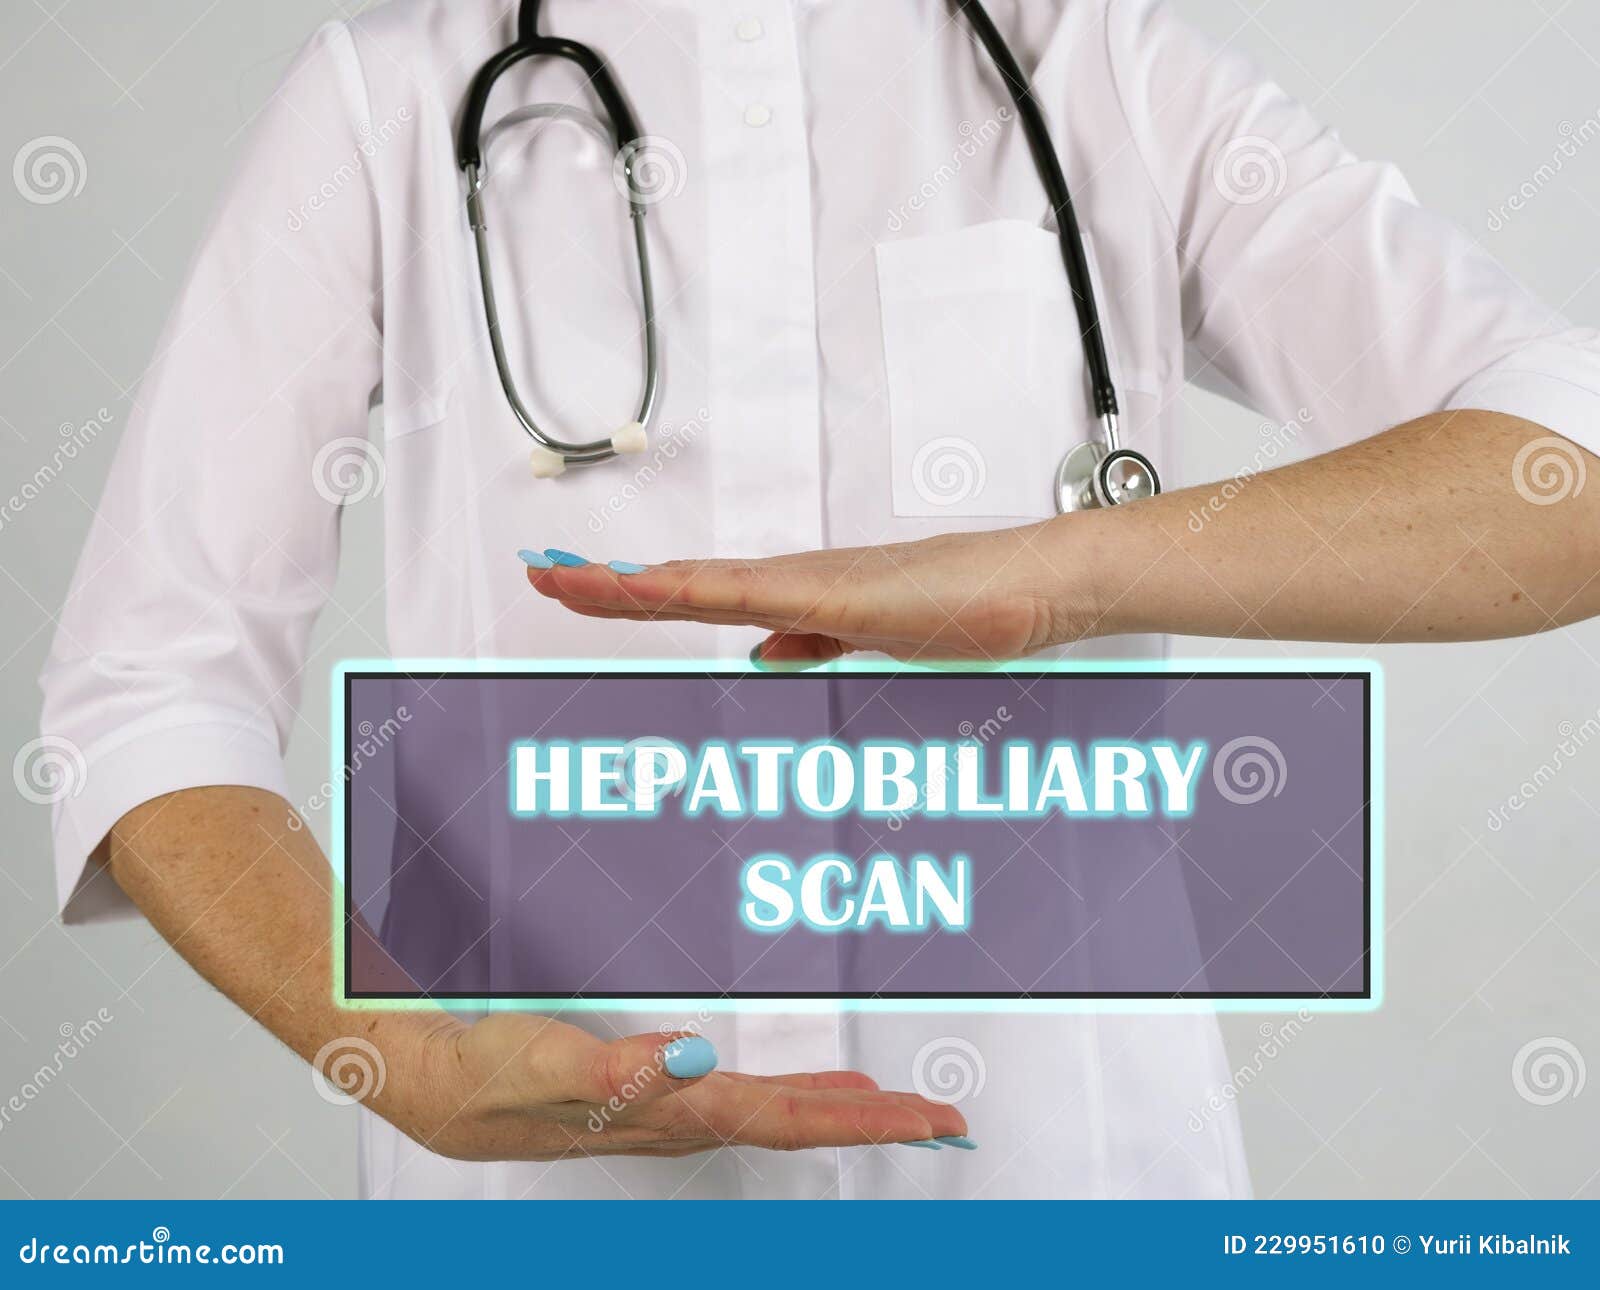 HEPATOBILIARY SCAN Phrase on the Screen Stock Photo - Image of doctor,  medicine: 229951610